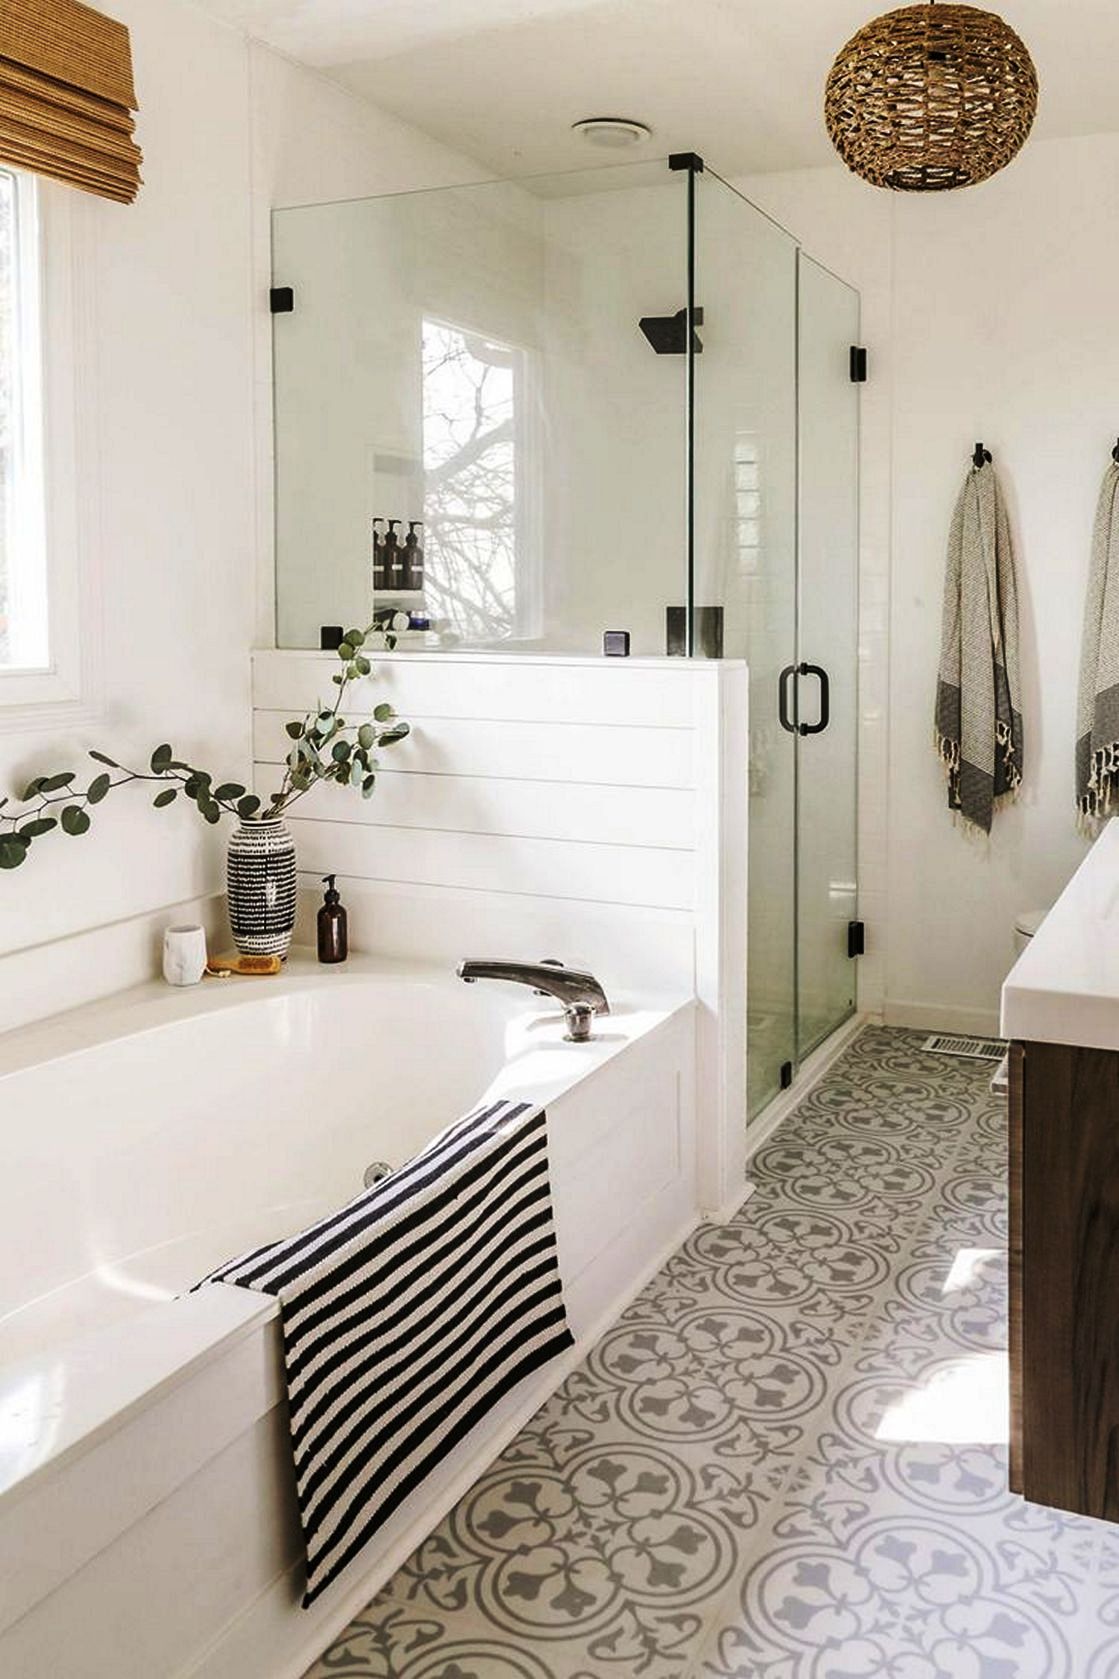 Bathroom remodel ideas that will work for your home in New Year 2021